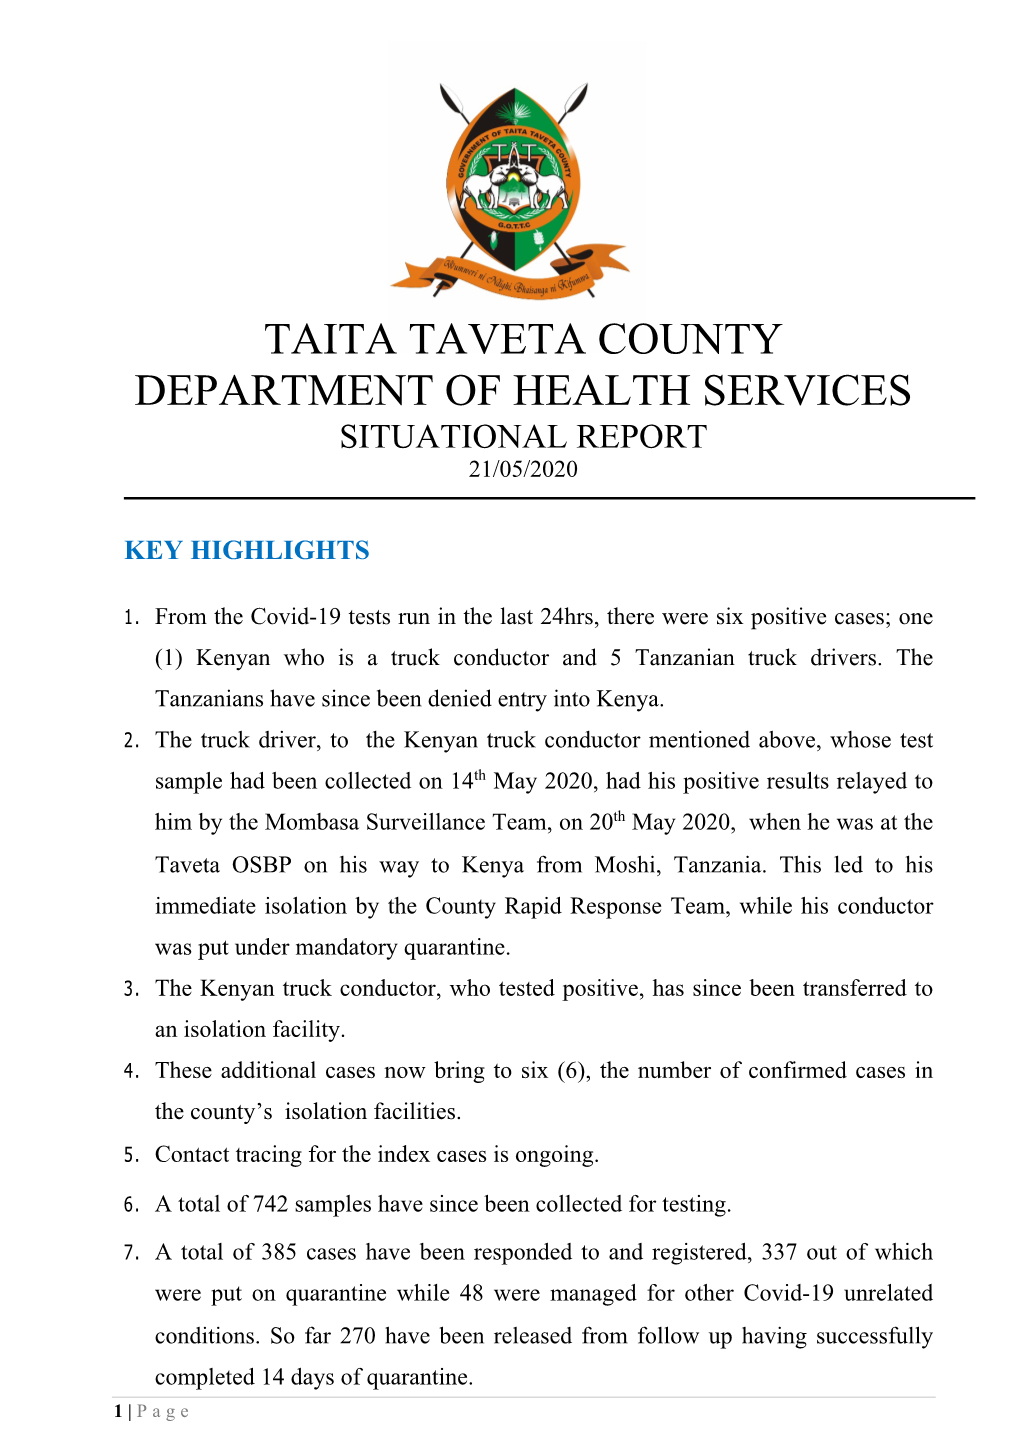 Taita Taveta County Department of Health Services Situational Report 21/05/2020